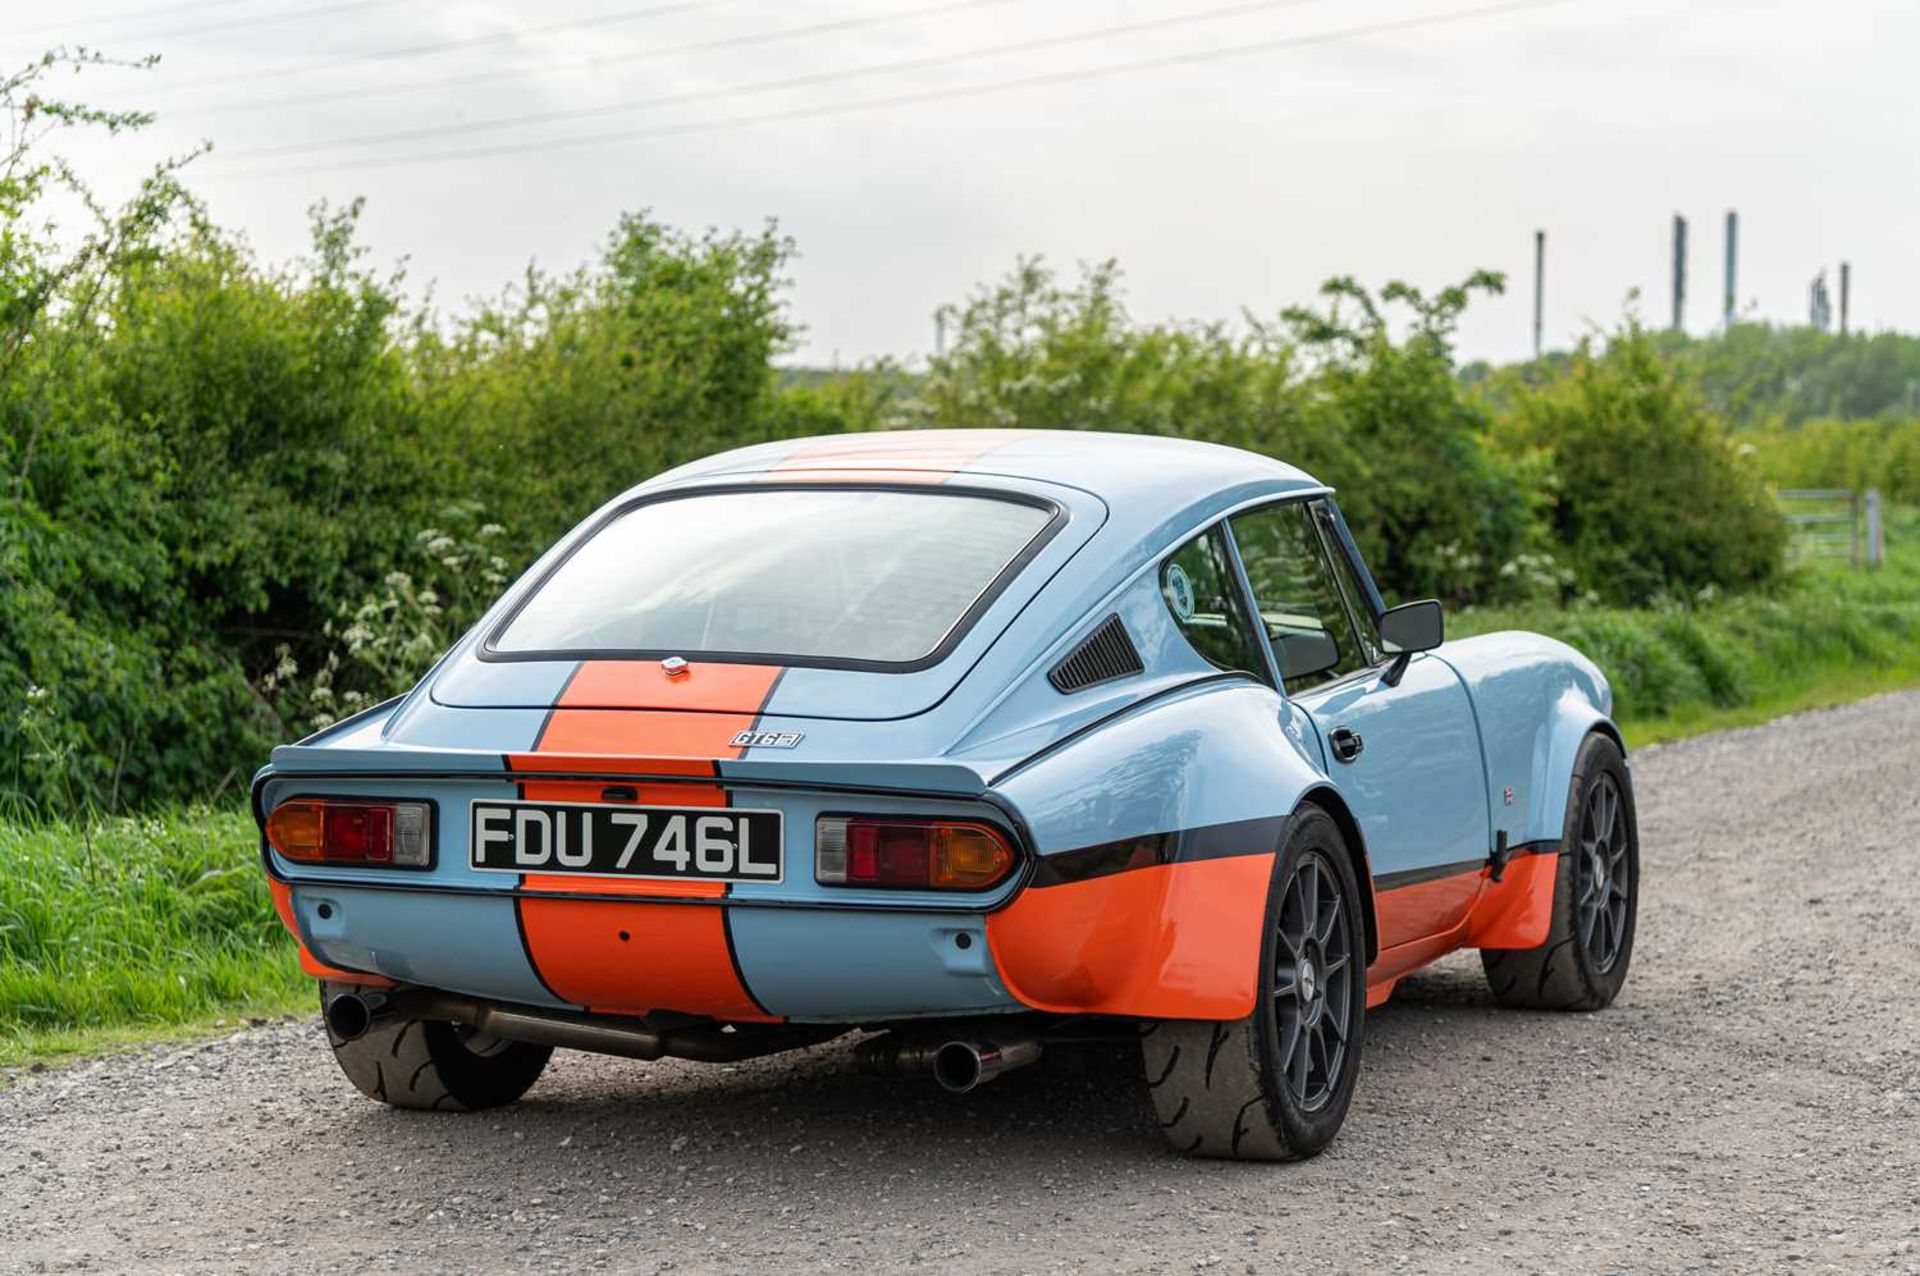 1973 Triumph GT6  ***NO RESERVE*** Presented in Gulf Racing-inspired paintwork, road-going track wea - Image 7 of 65